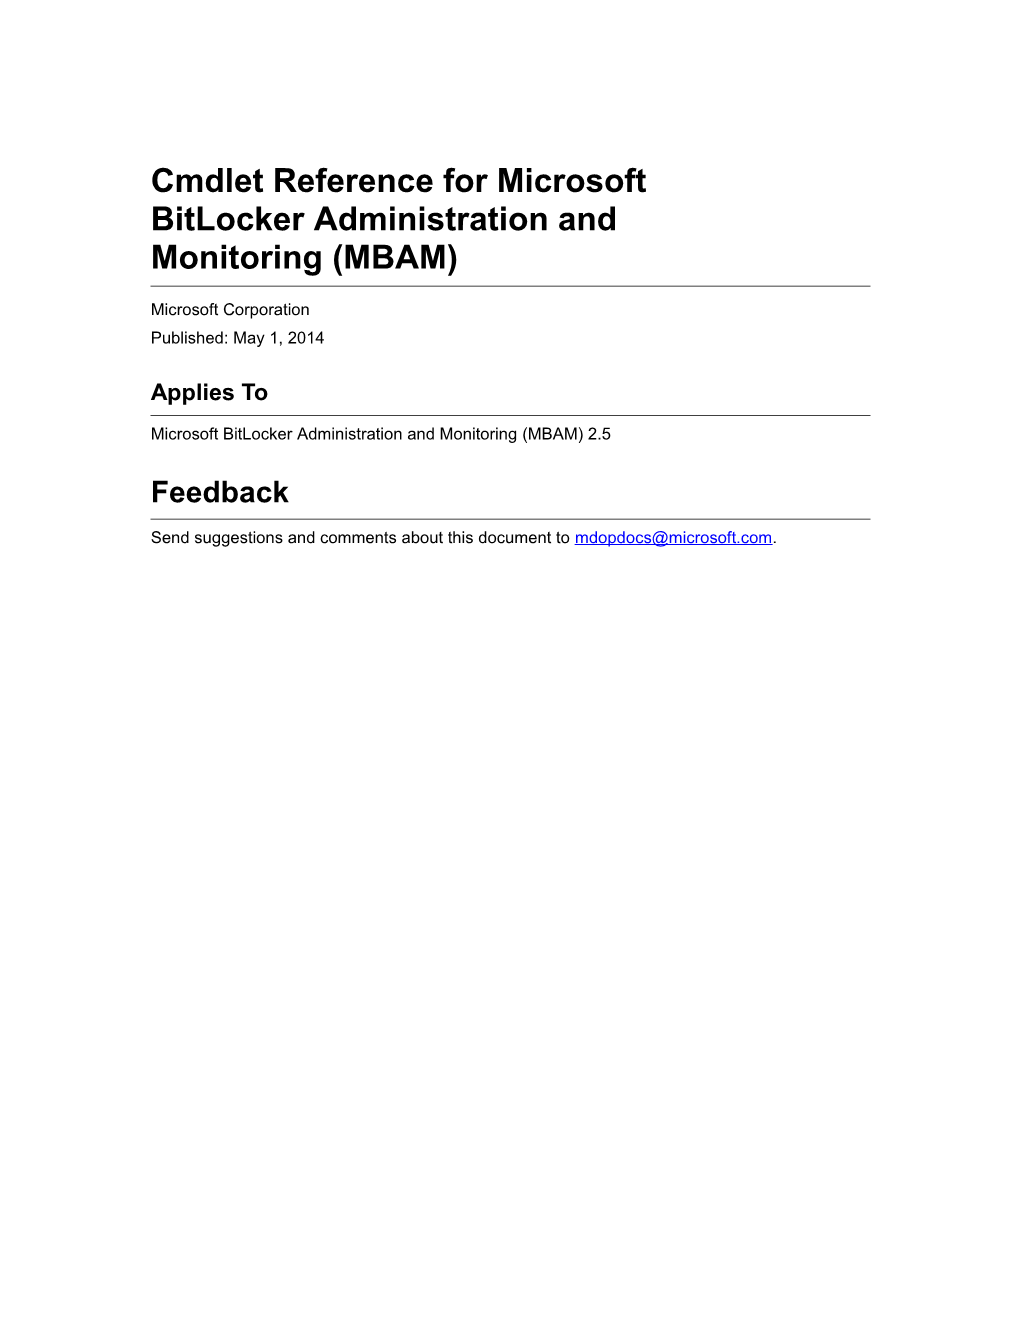 Cmdlet Reference for Microsoft Bitlockeradministration and Monitoring(MBAM)